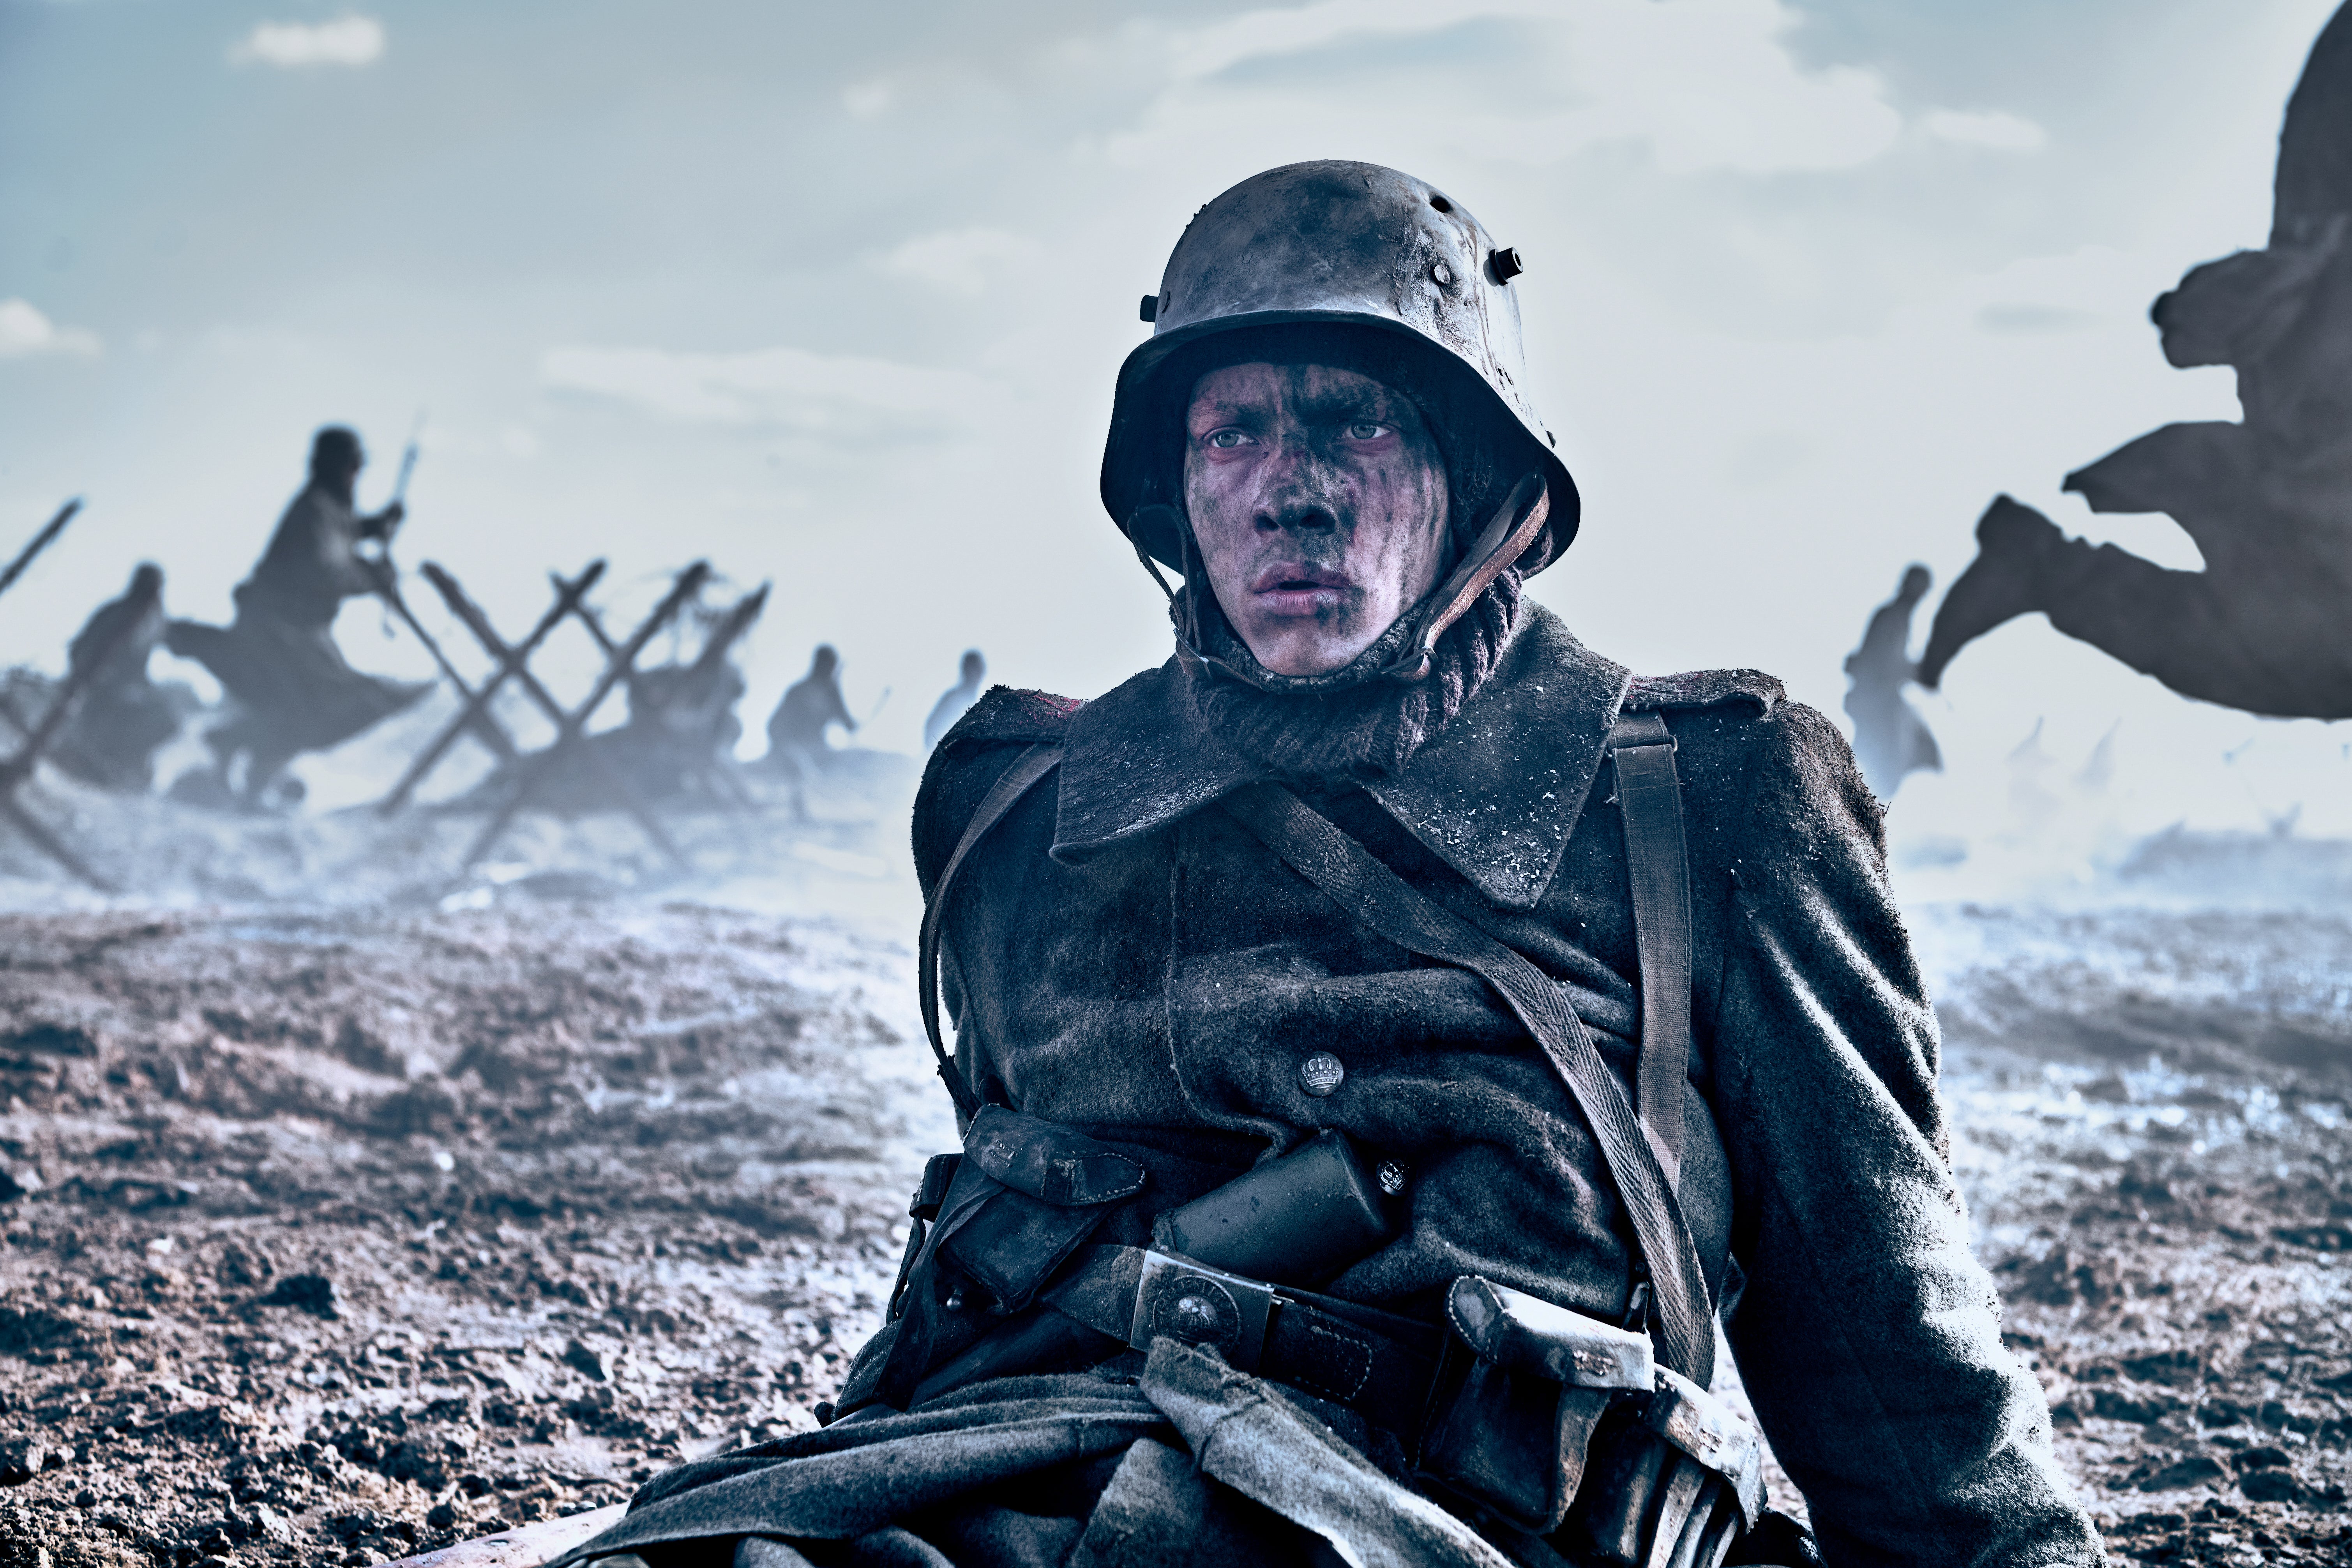 An ash-covered and ashen-faced soldier slouches on the battlefield in No Man's Land, staring a thousand yards in the distance